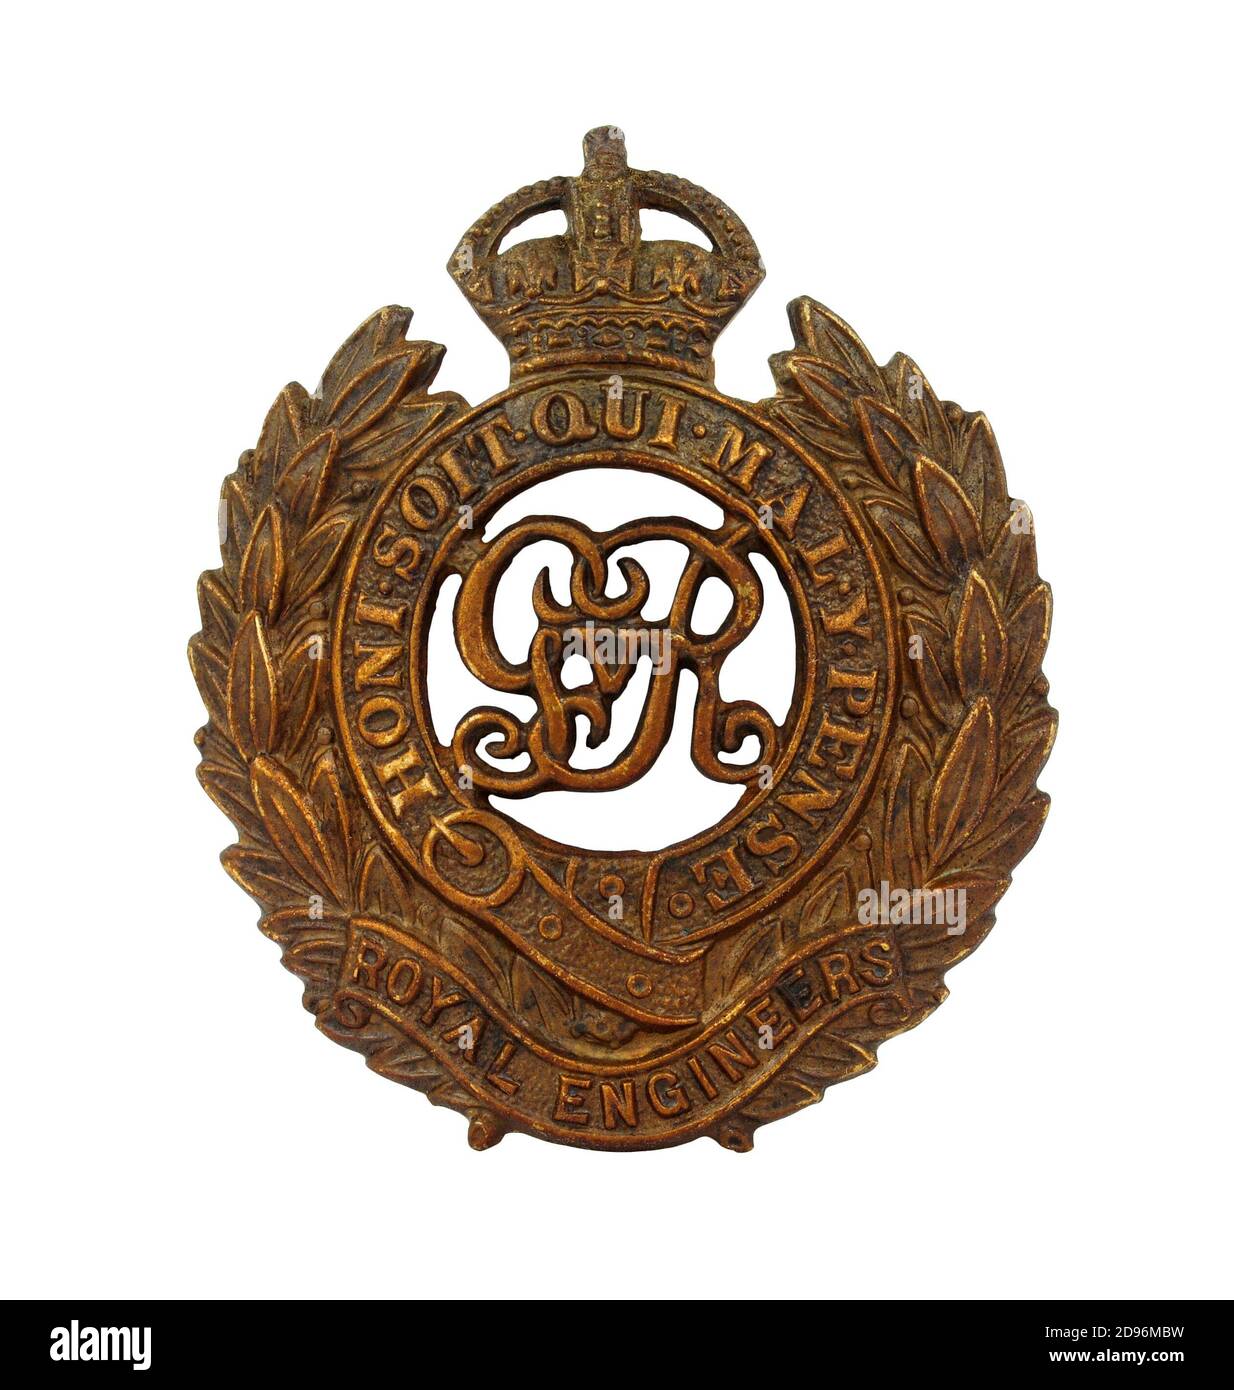 British army Royal Corps of Engineers world war one cap badge isolated on a white background Stock Photo